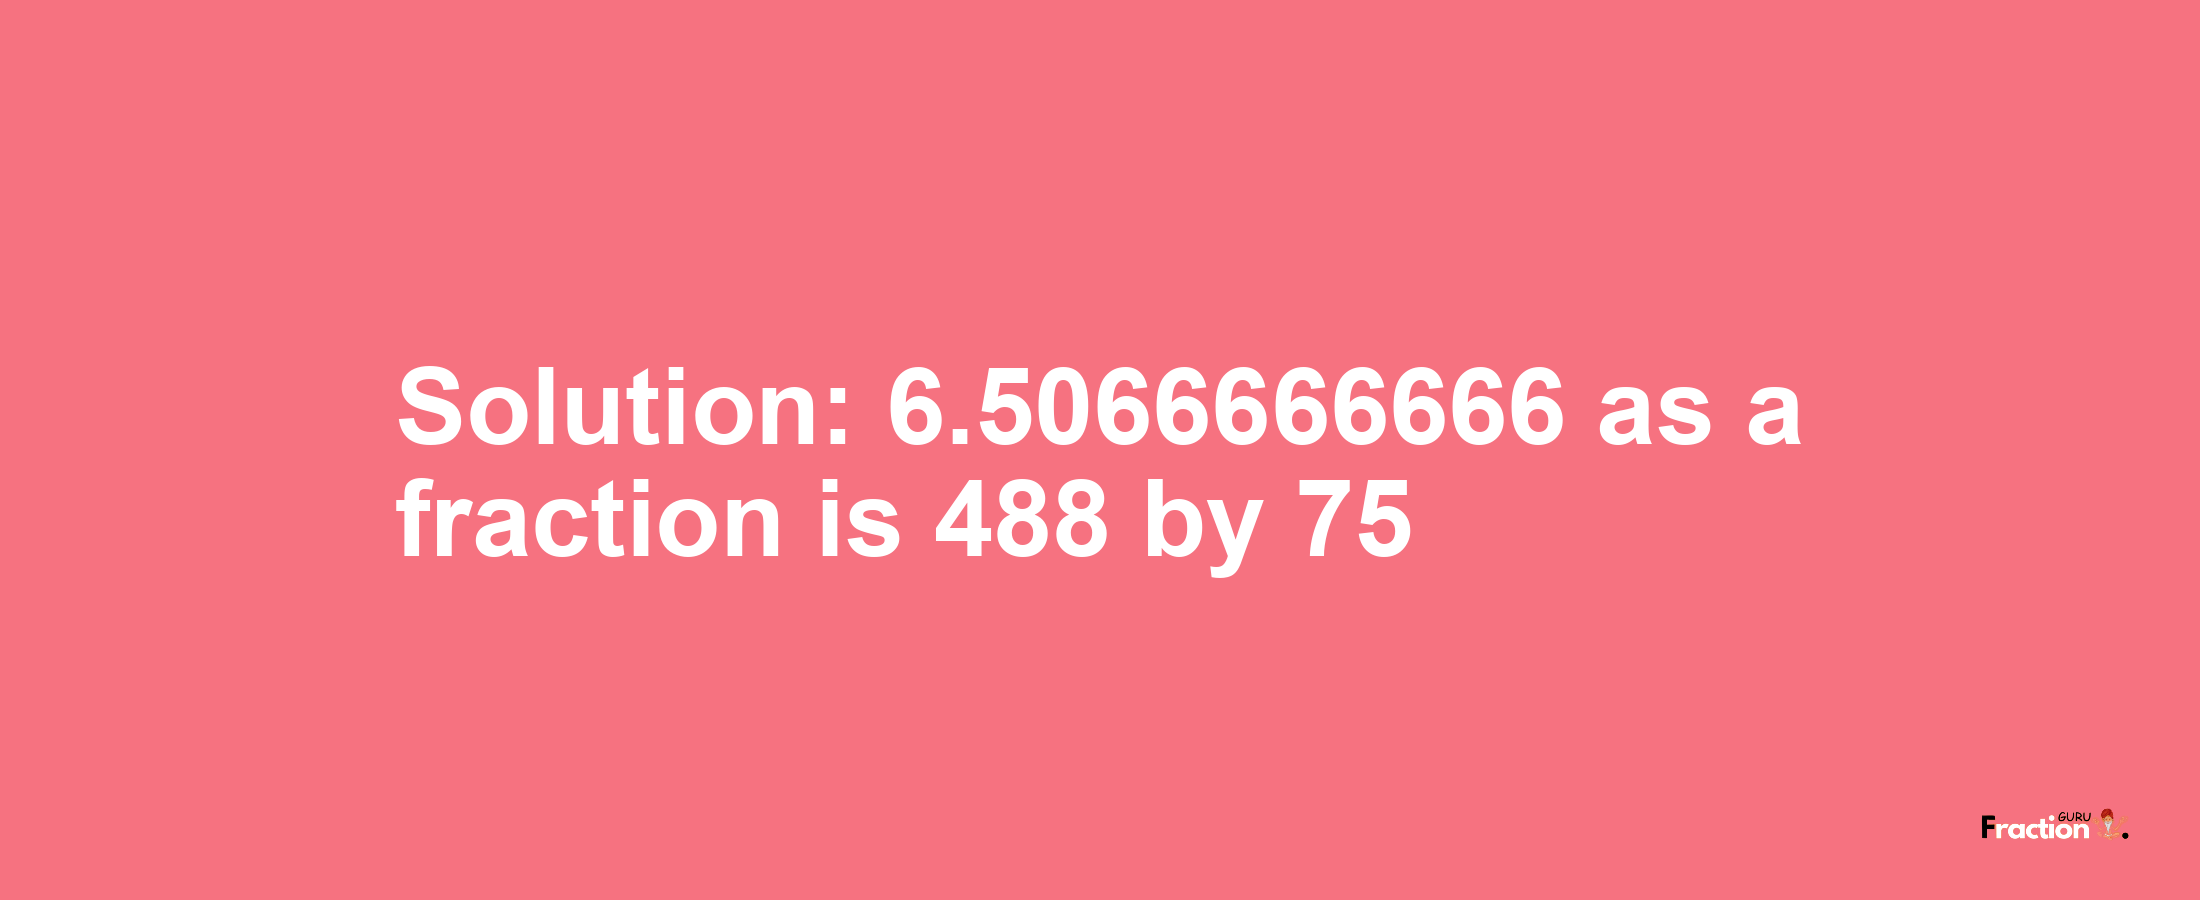 Solution:6.5066666666 as a fraction is 488/75